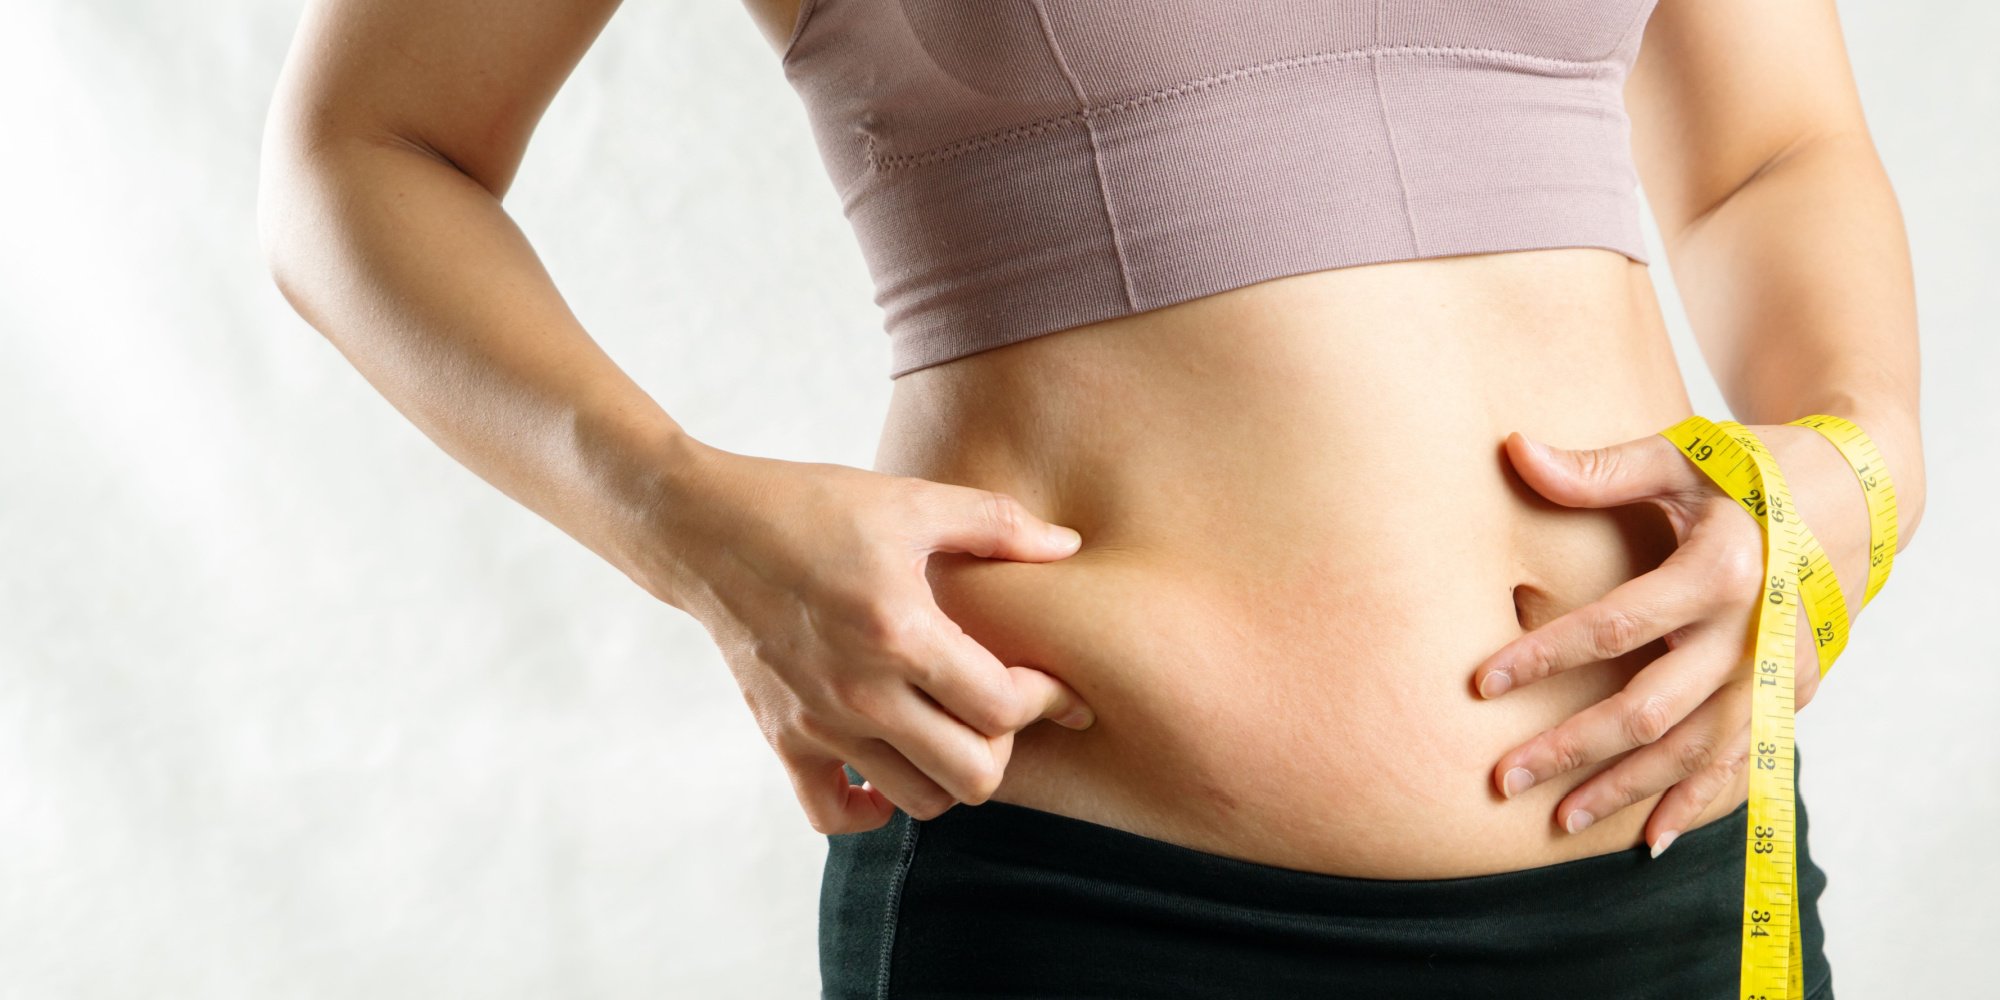 Why Can’t I Get Rid of My Belly Fat?